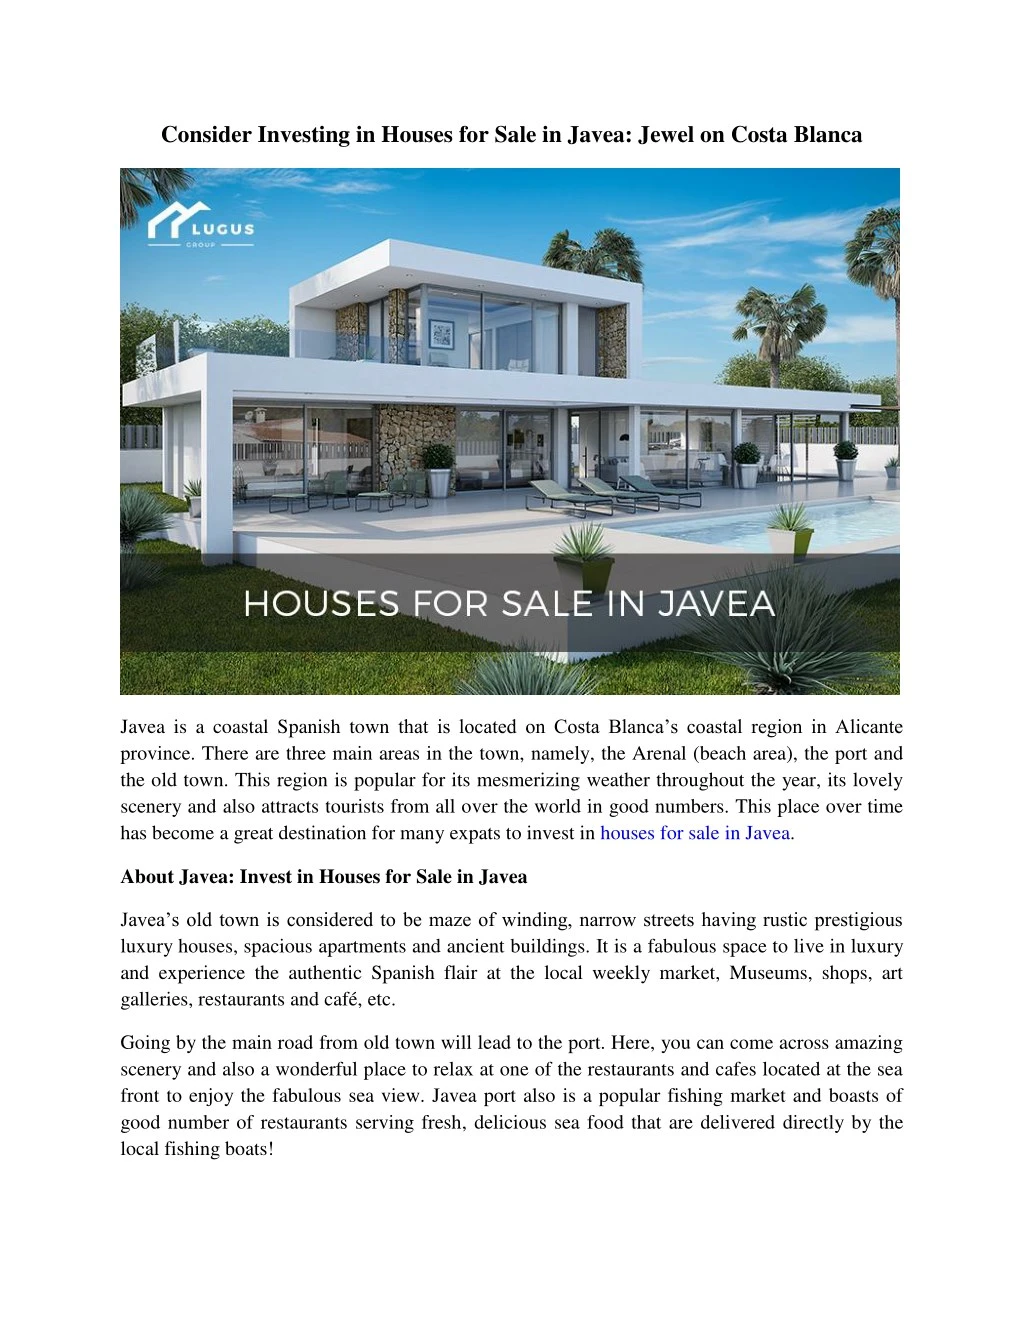 consider investing in houses for sale in javea